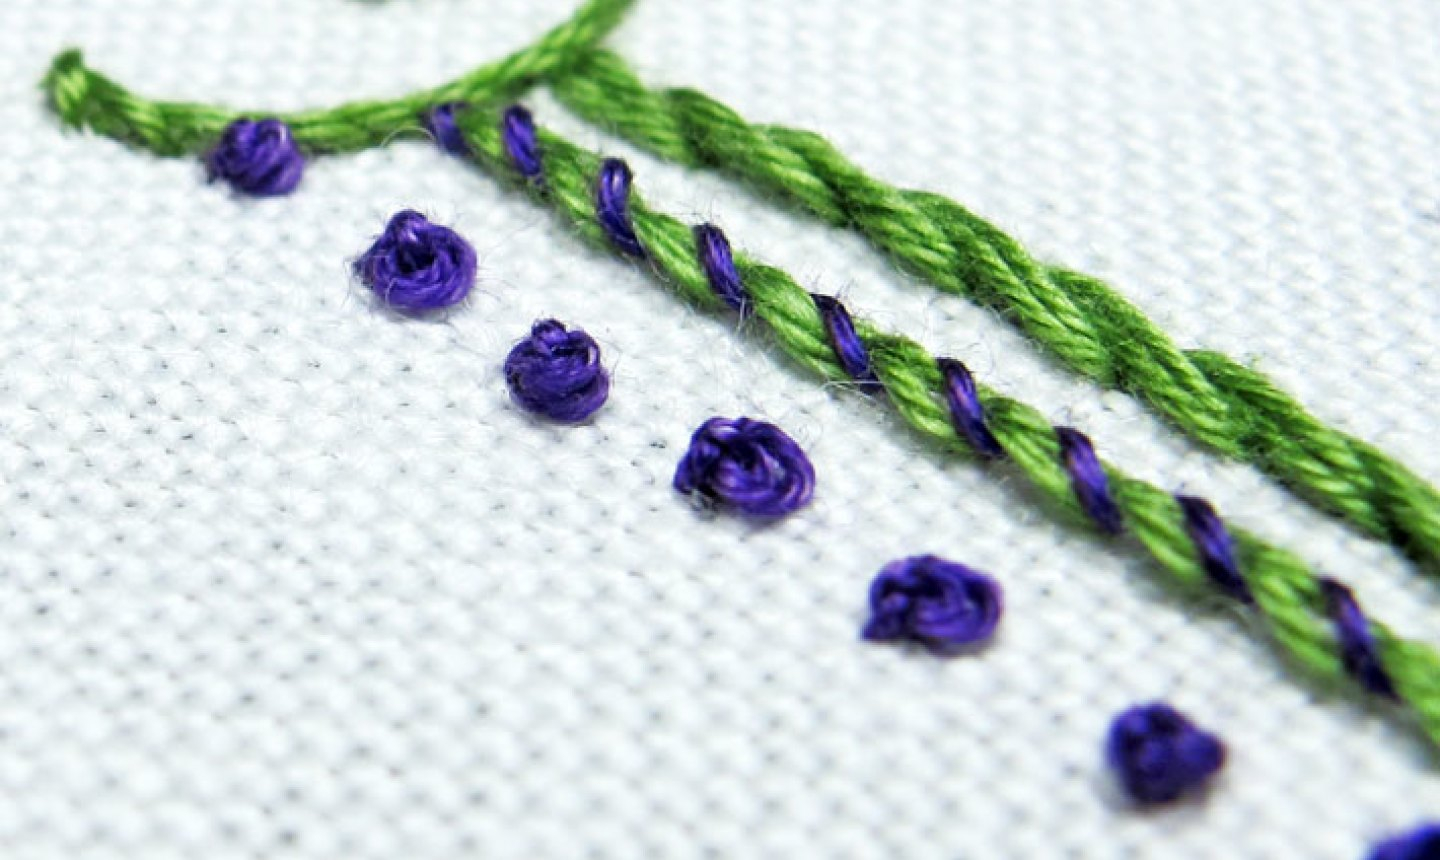 French Embroidery Patterns How To Start Embroidery Threads Without A Knot